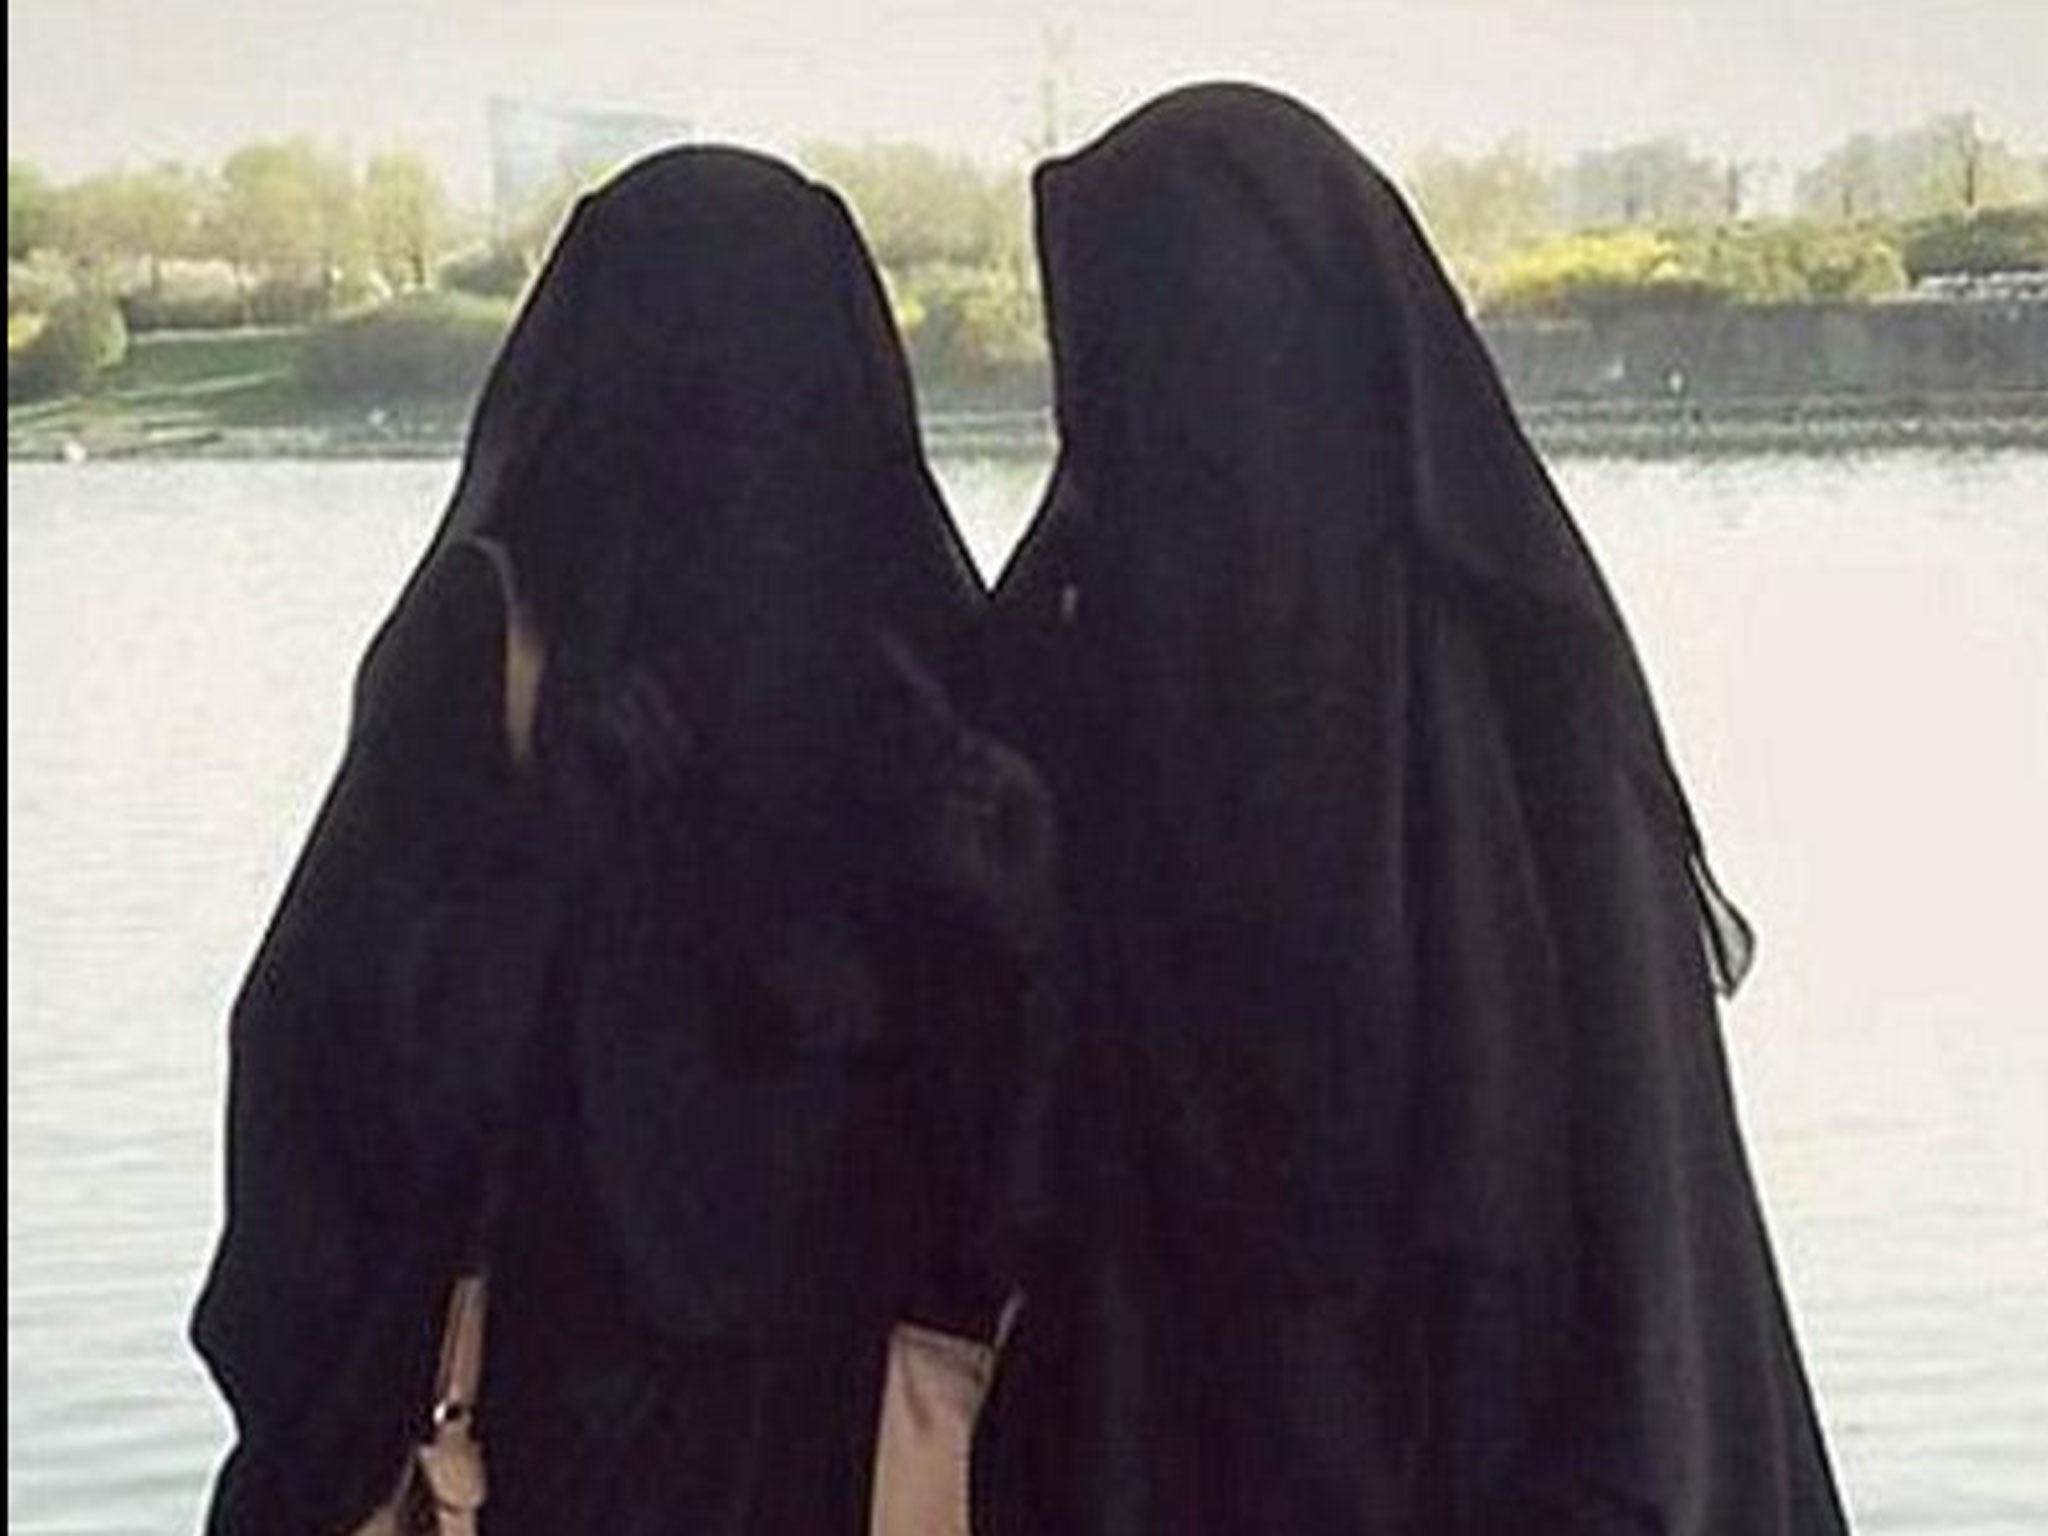 File: Isis uses Western women who travel to join it as propaganda